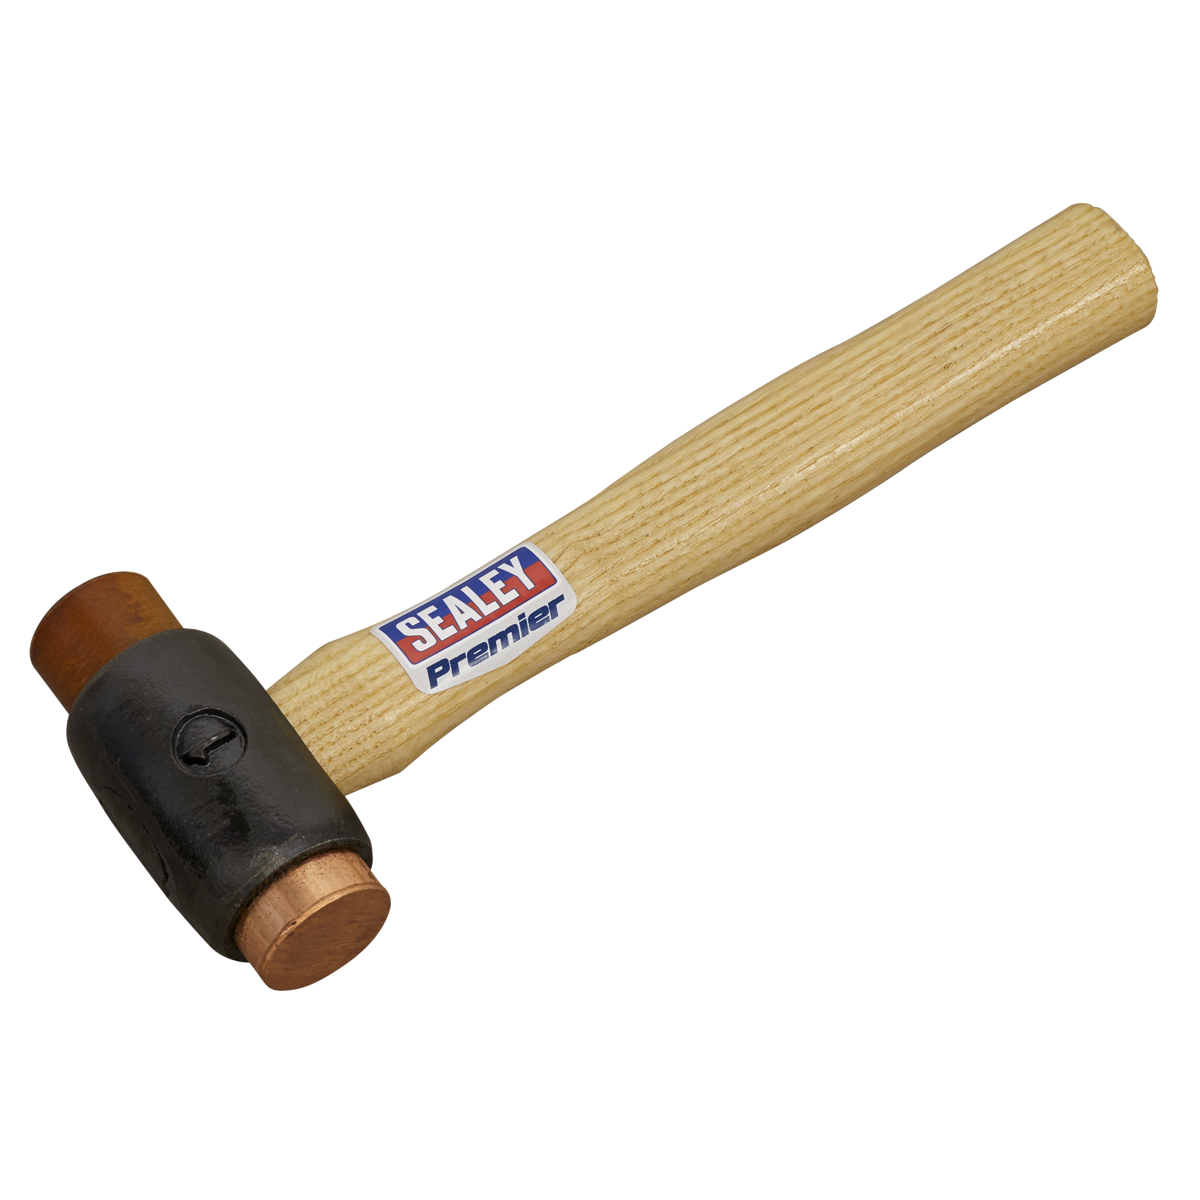 Sealey Copper/Rawhide Faced Hammer 1.5lb Hickory Shaft